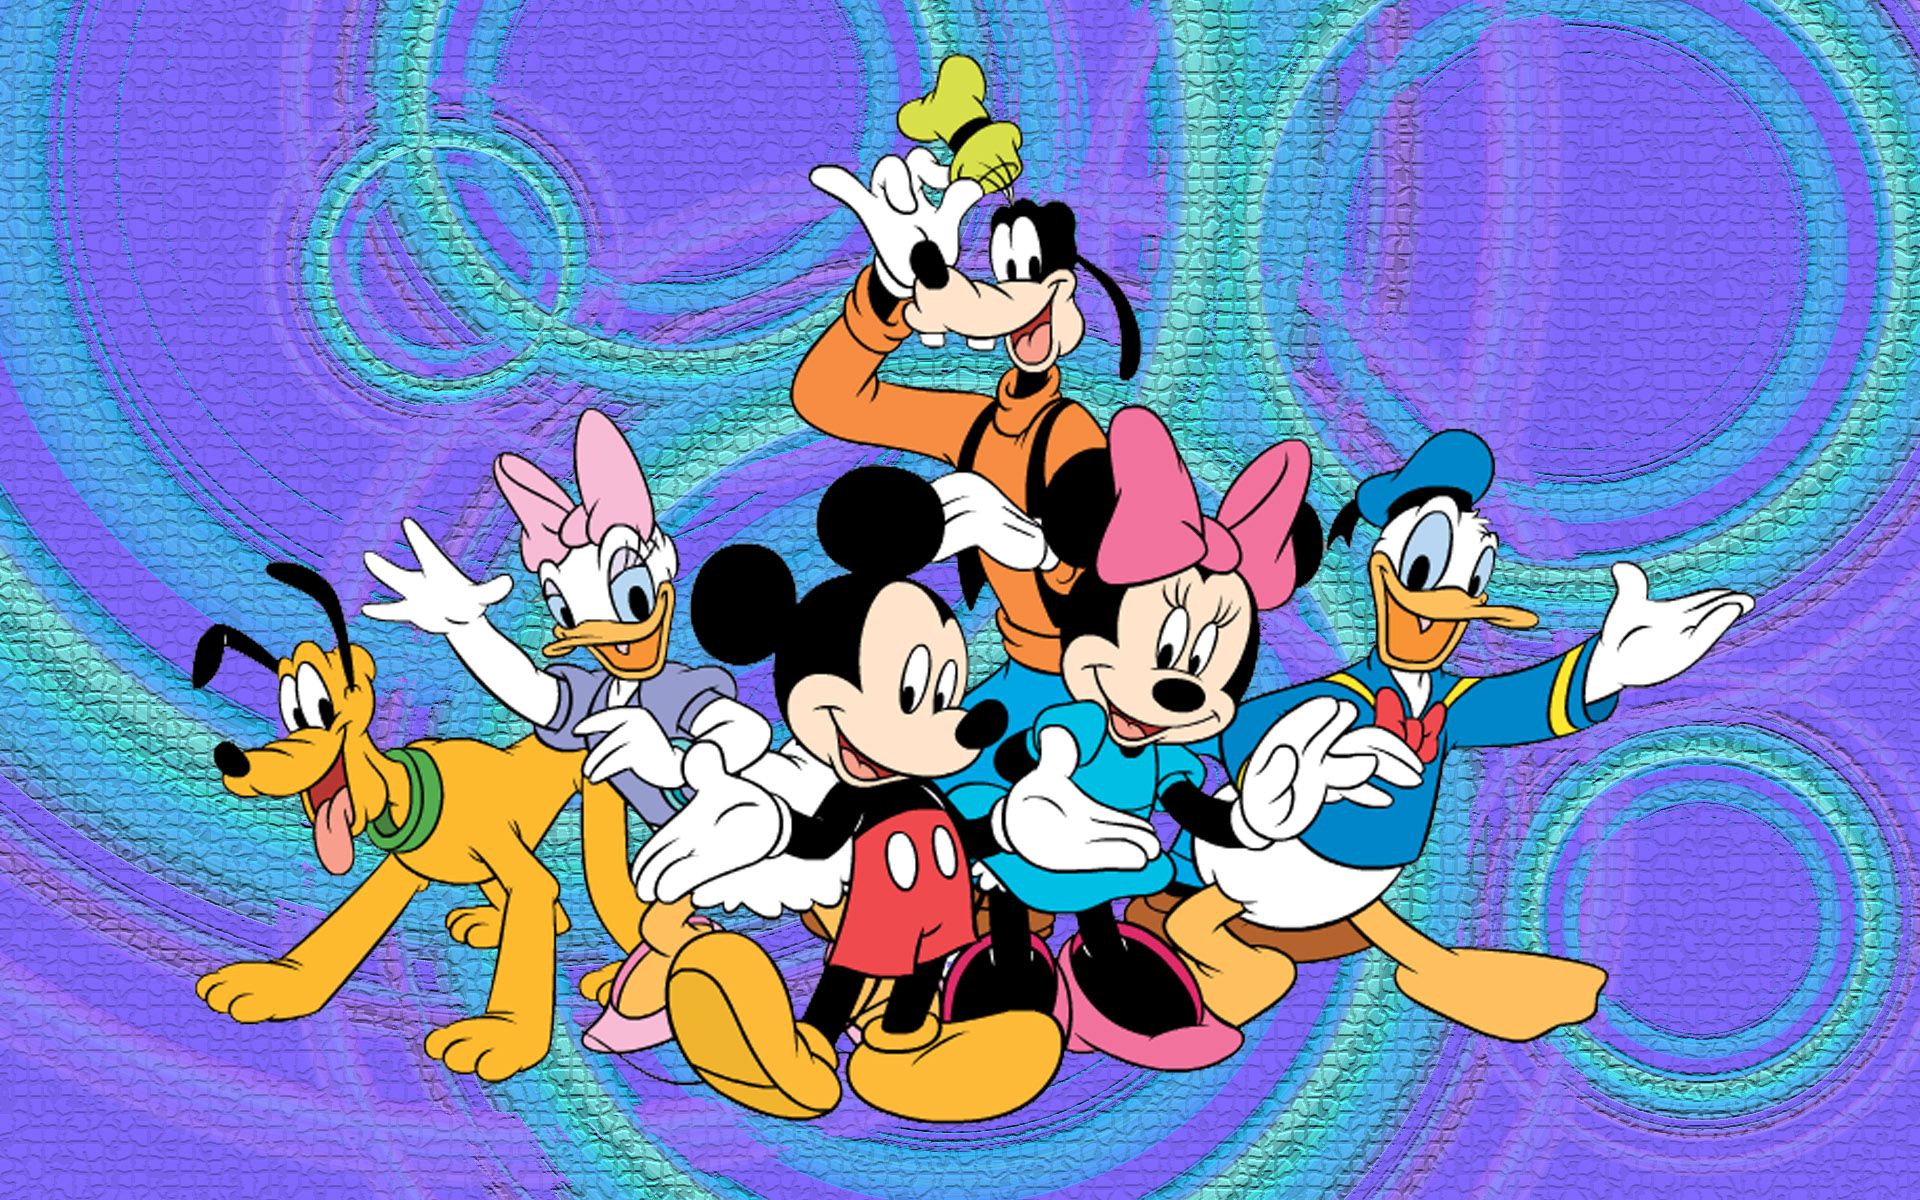 Mickey Mouse And Friends Desktop Wallpaper HD For Mobile Phones And Laptops 1920x1200, Wallpaper13.com